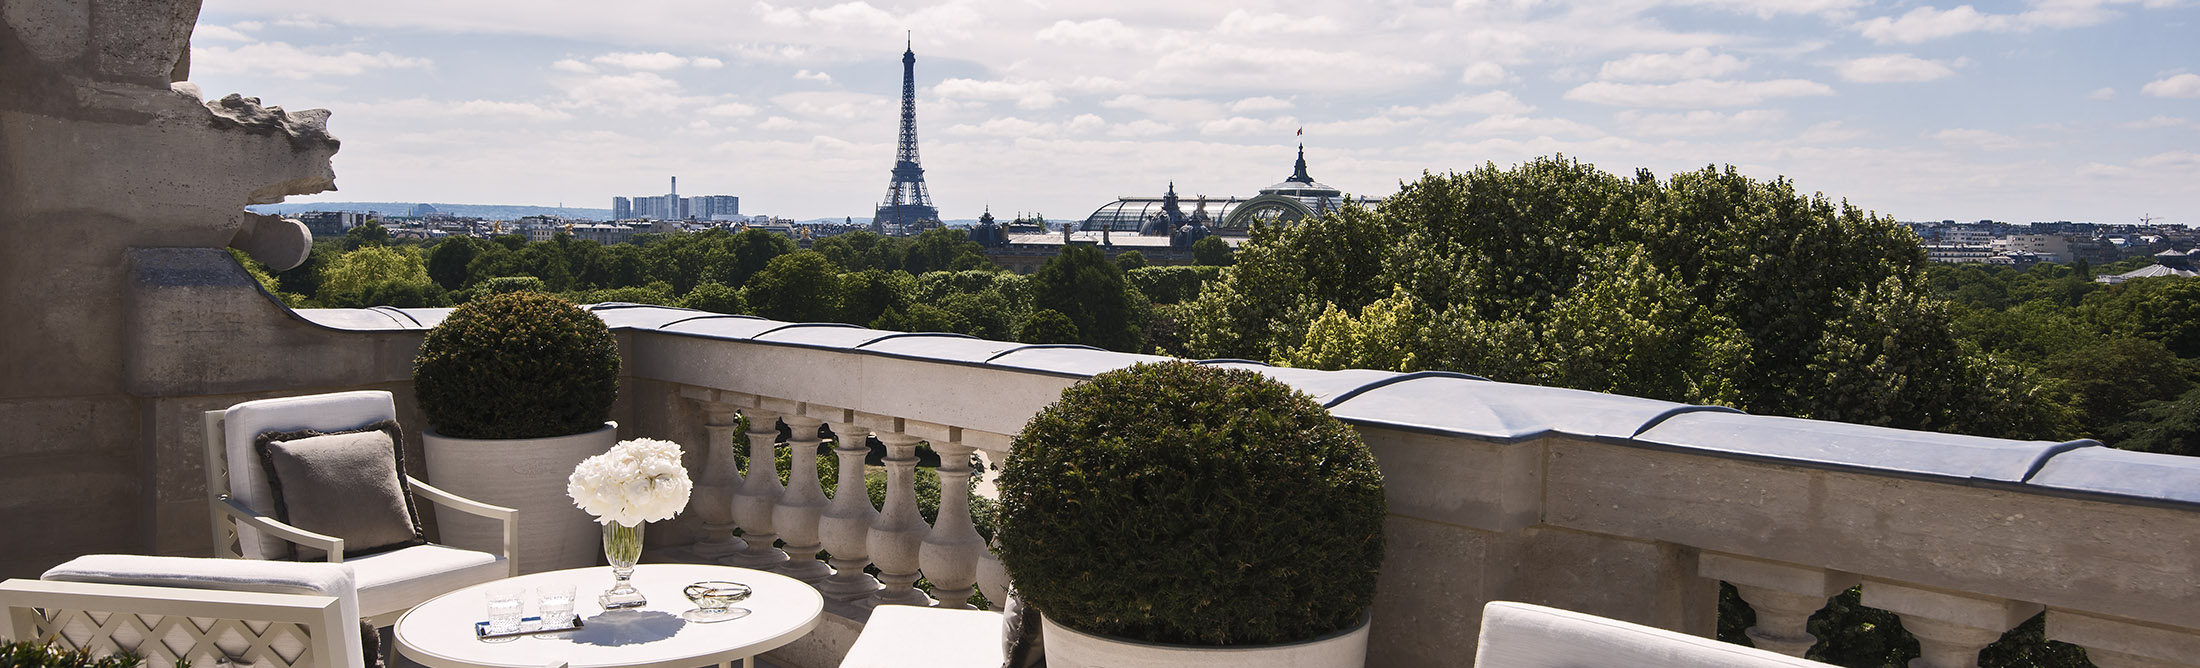 Got $1,000 to Spend per Night in Paris? Book One of These Hotels